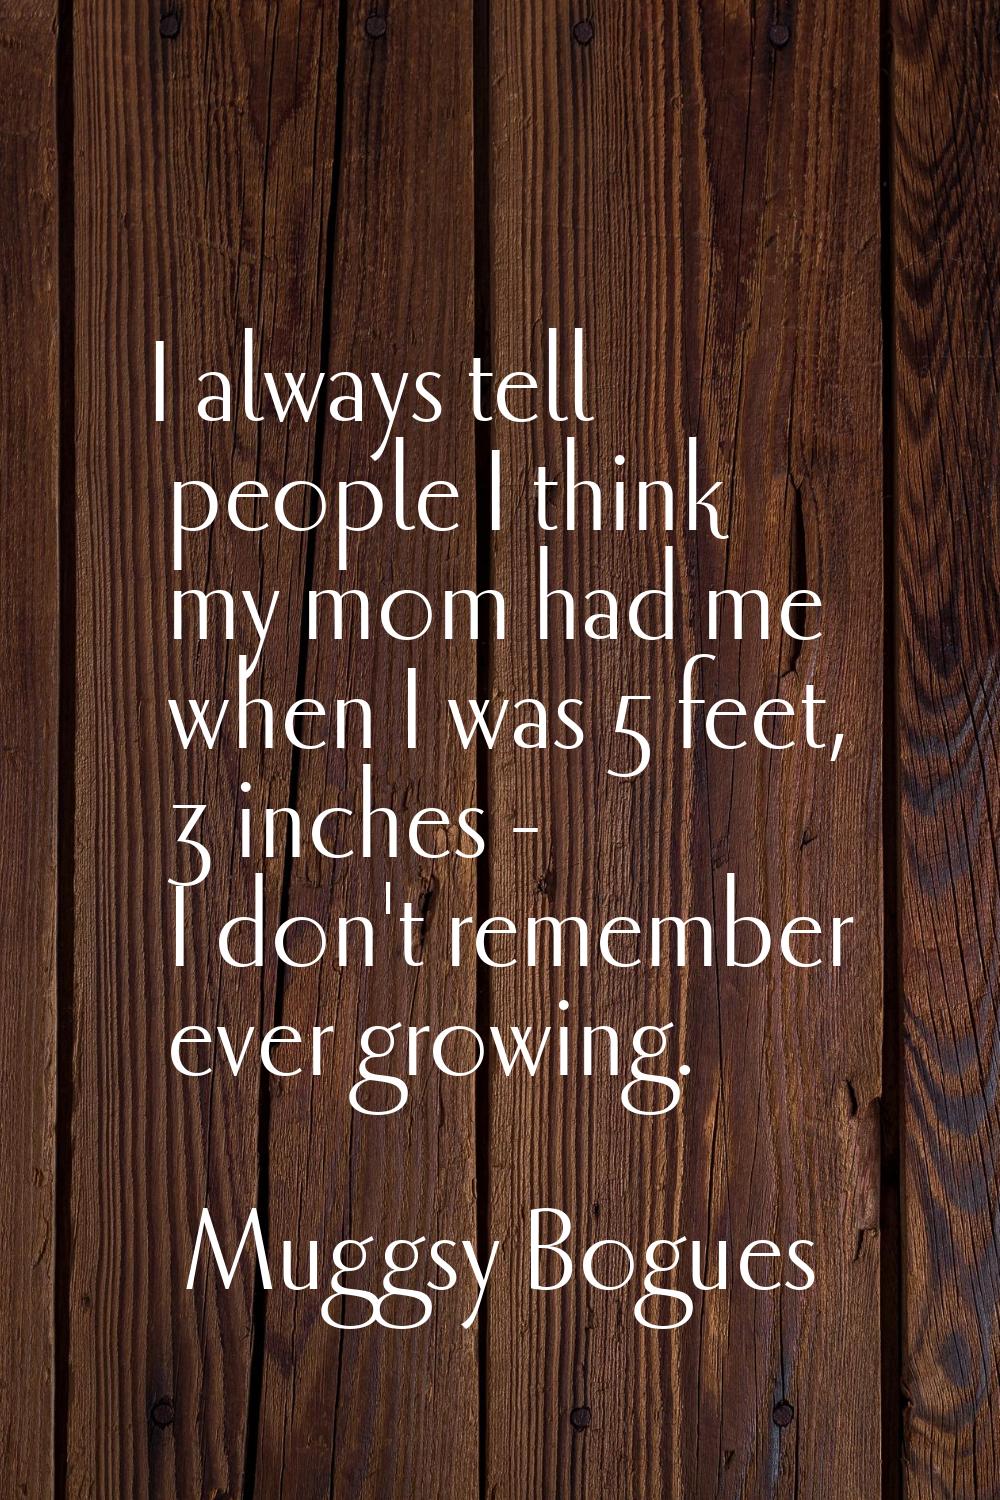 I always tell people I think my mom had me when I was 5 feet, 3 inches - I don't remember ever grow